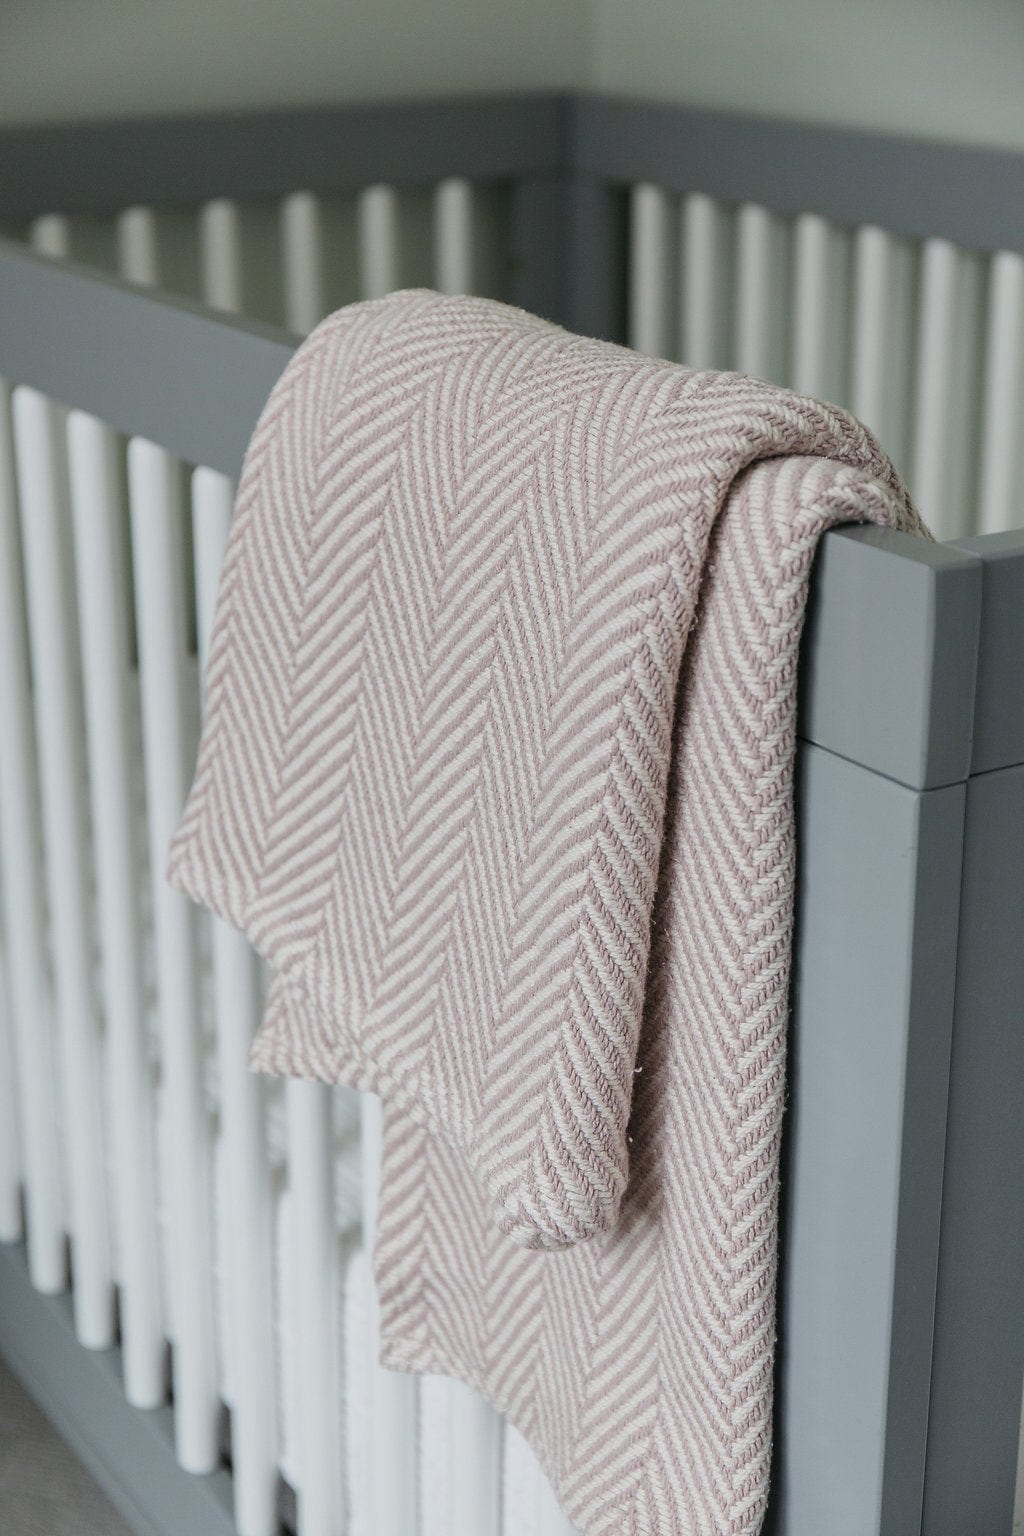 herringbone baby blanket finished in blush color draped over a crip